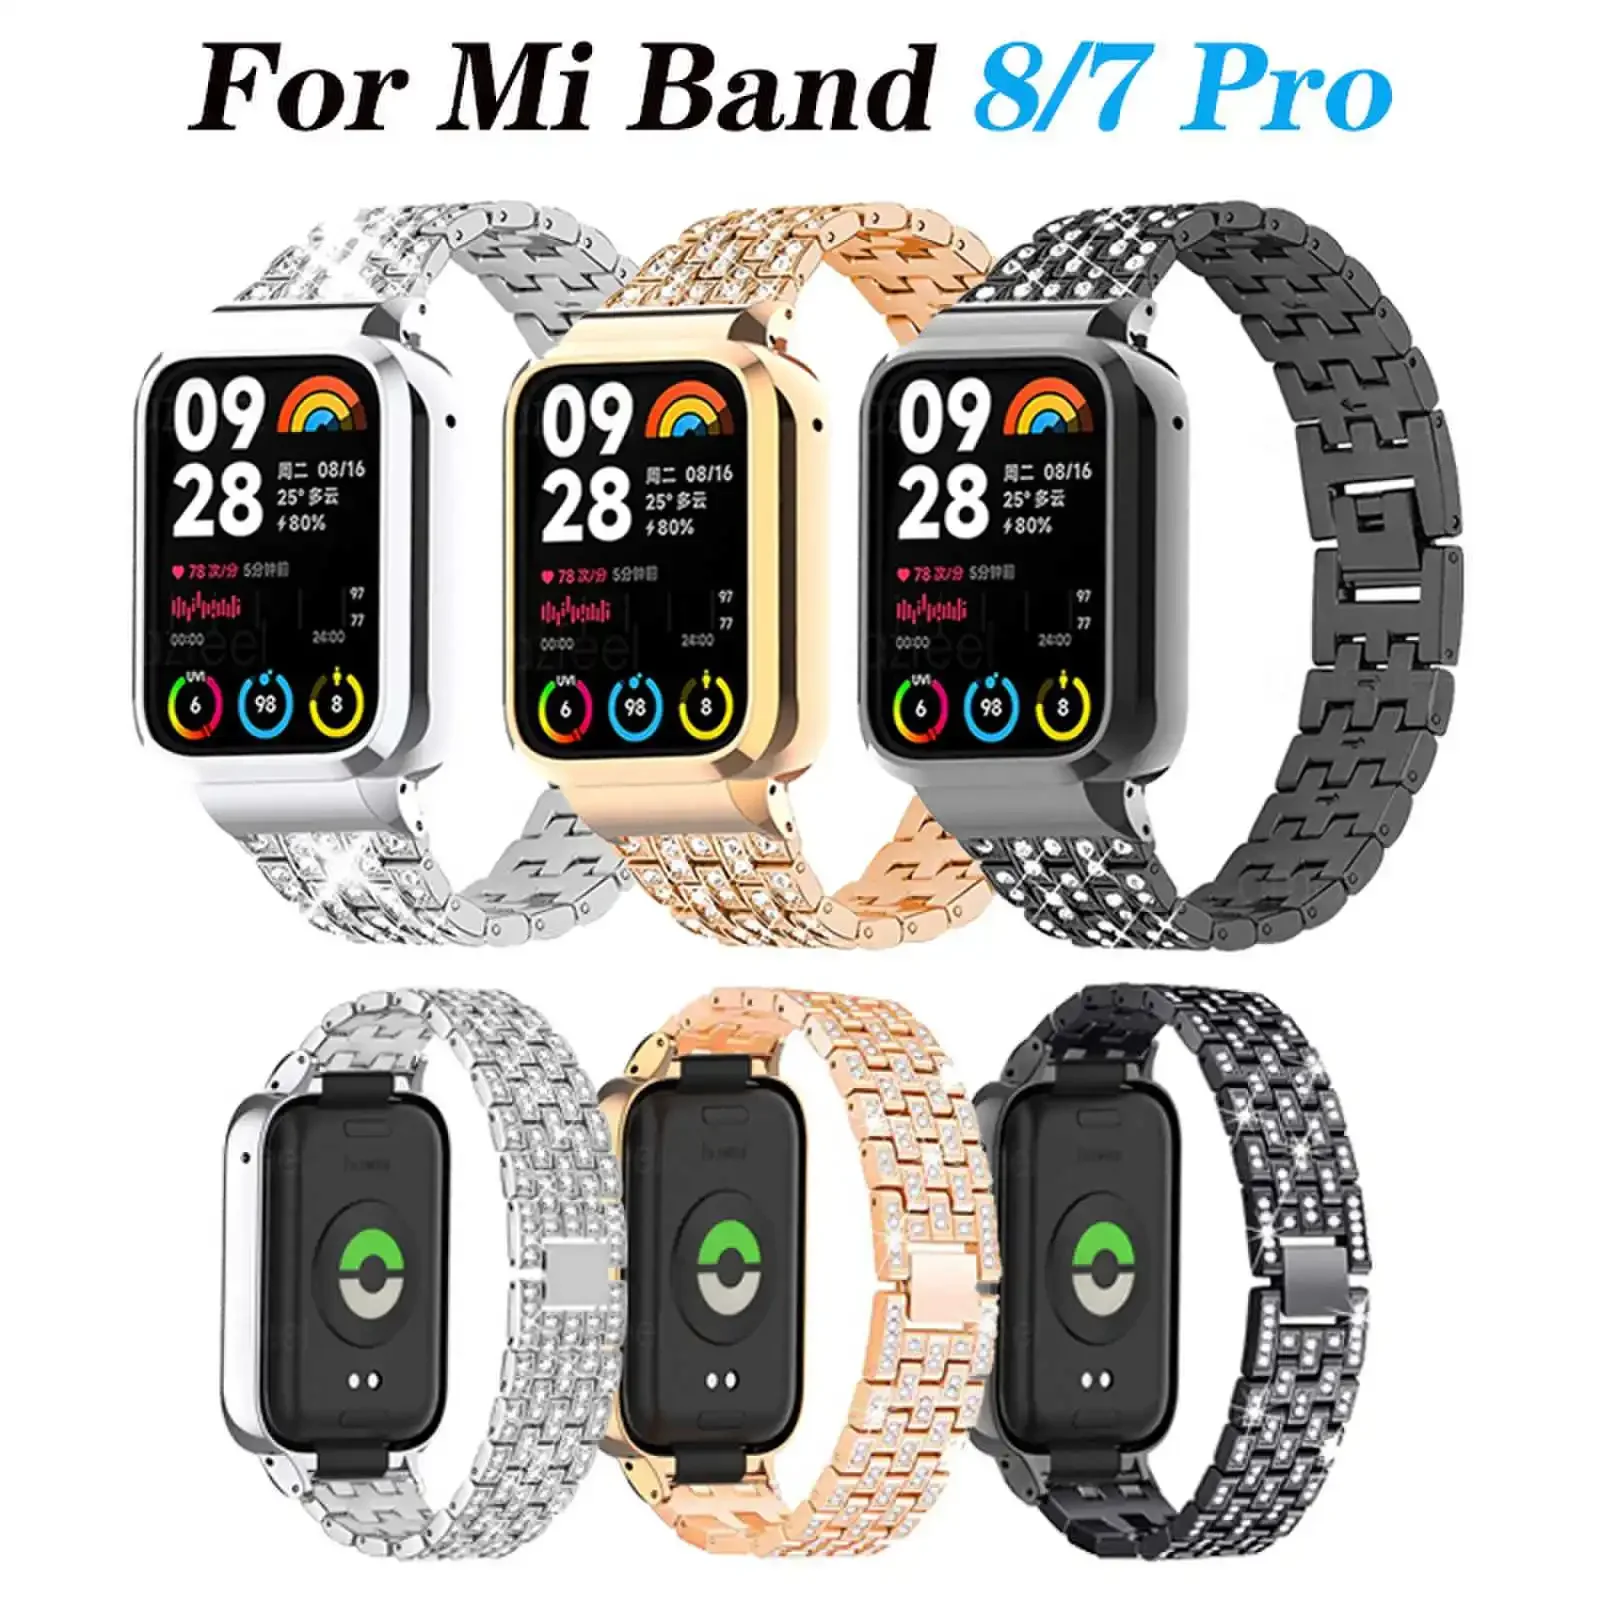 

Diamond Strap for Xiaomi Mi Band 8 7 pro Metal Case Replacement Wristband Bracelet for Xiomi miband 8pro Smart Band Accessories